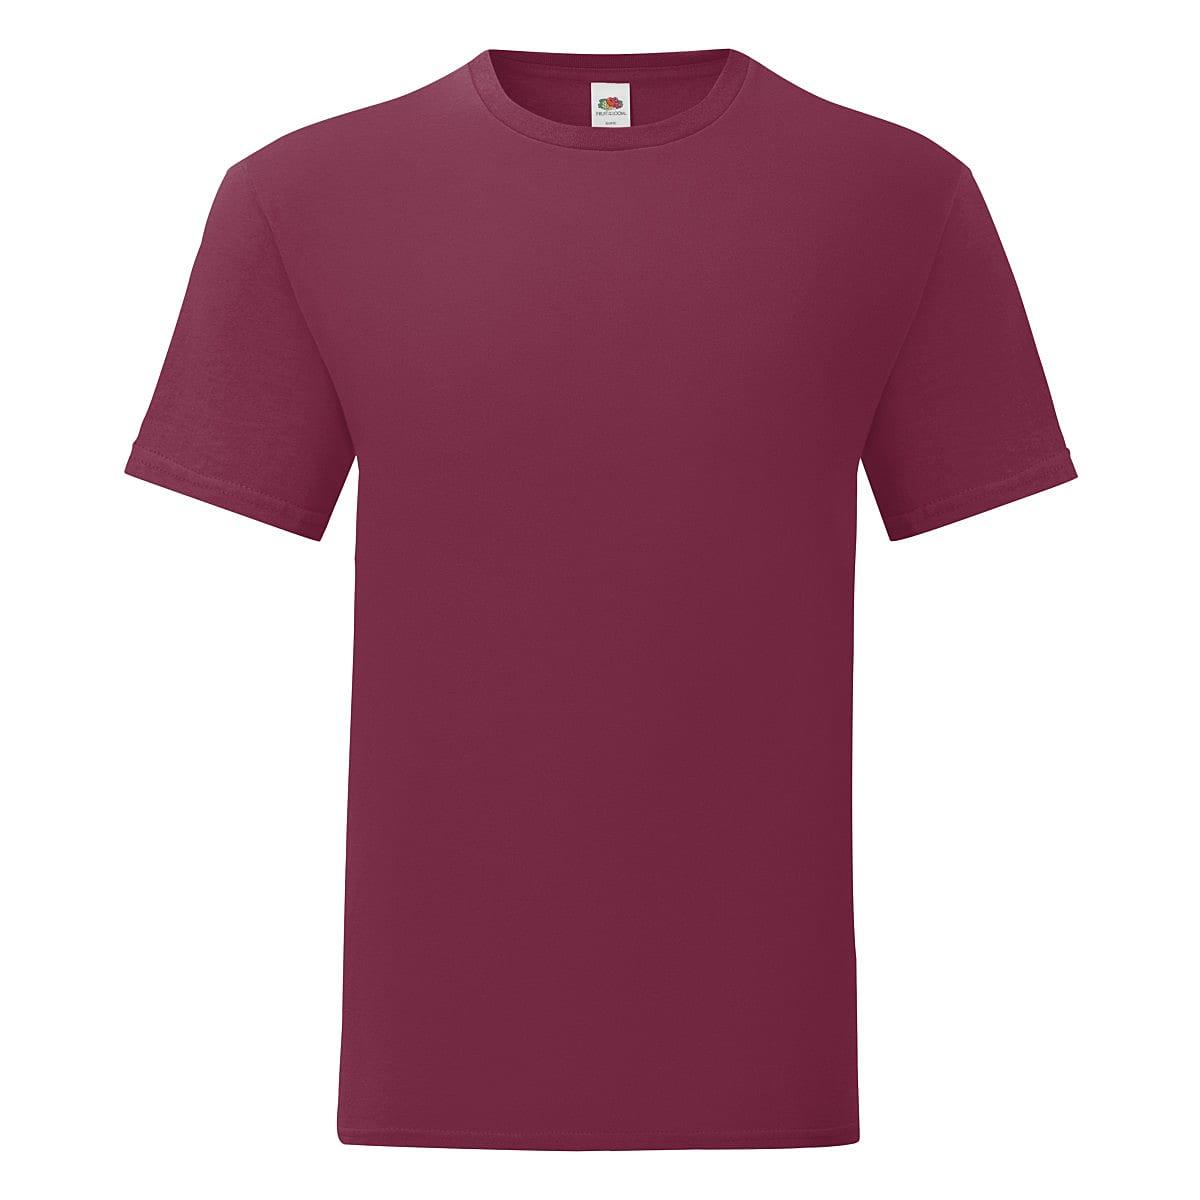 Fruit Of The Loom Mens Iconic T-Shirt in Burgundy (Product Code: 61430)